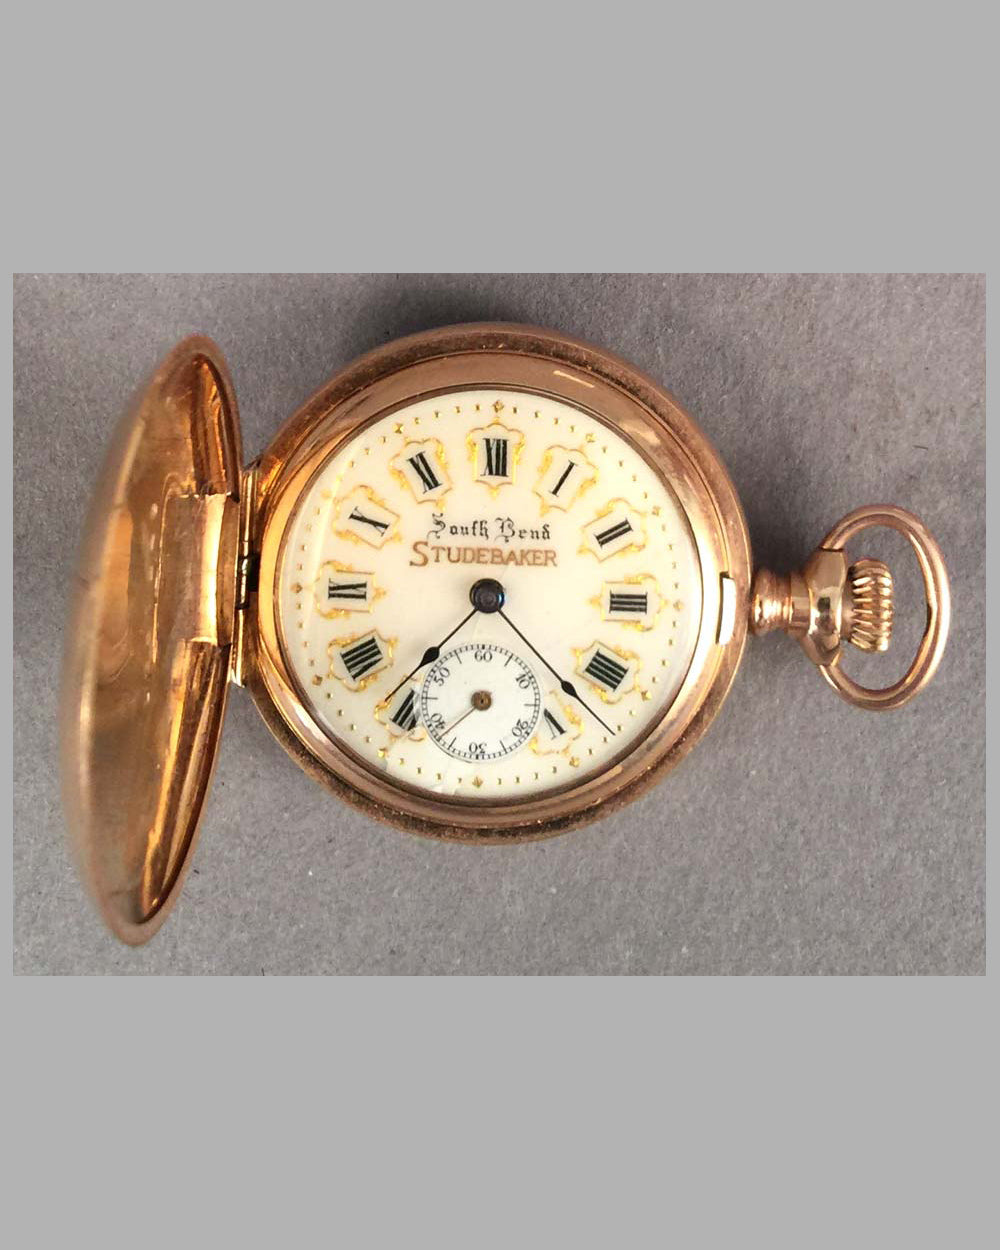 Studebaker woman pocket watch by South Bend